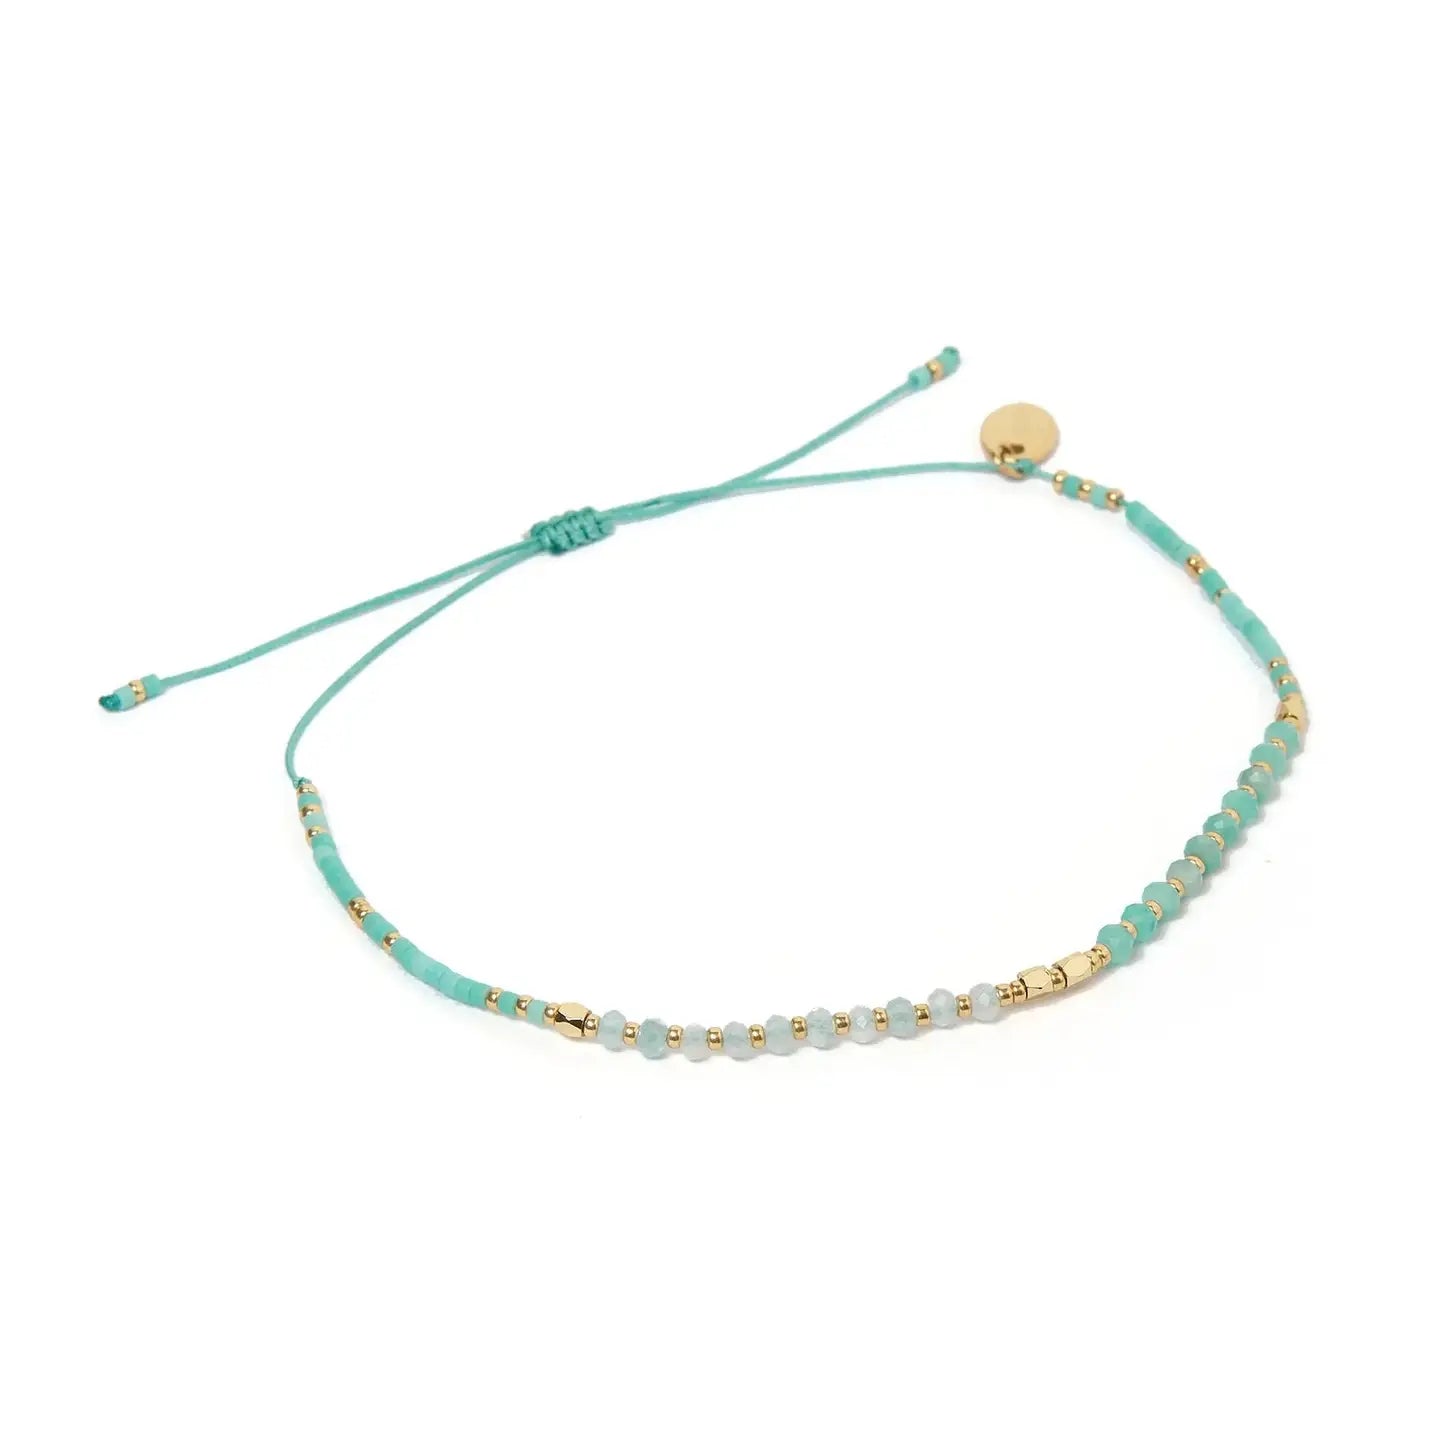 The Pia Crystal Beaded Bracelet by Arms of Eve